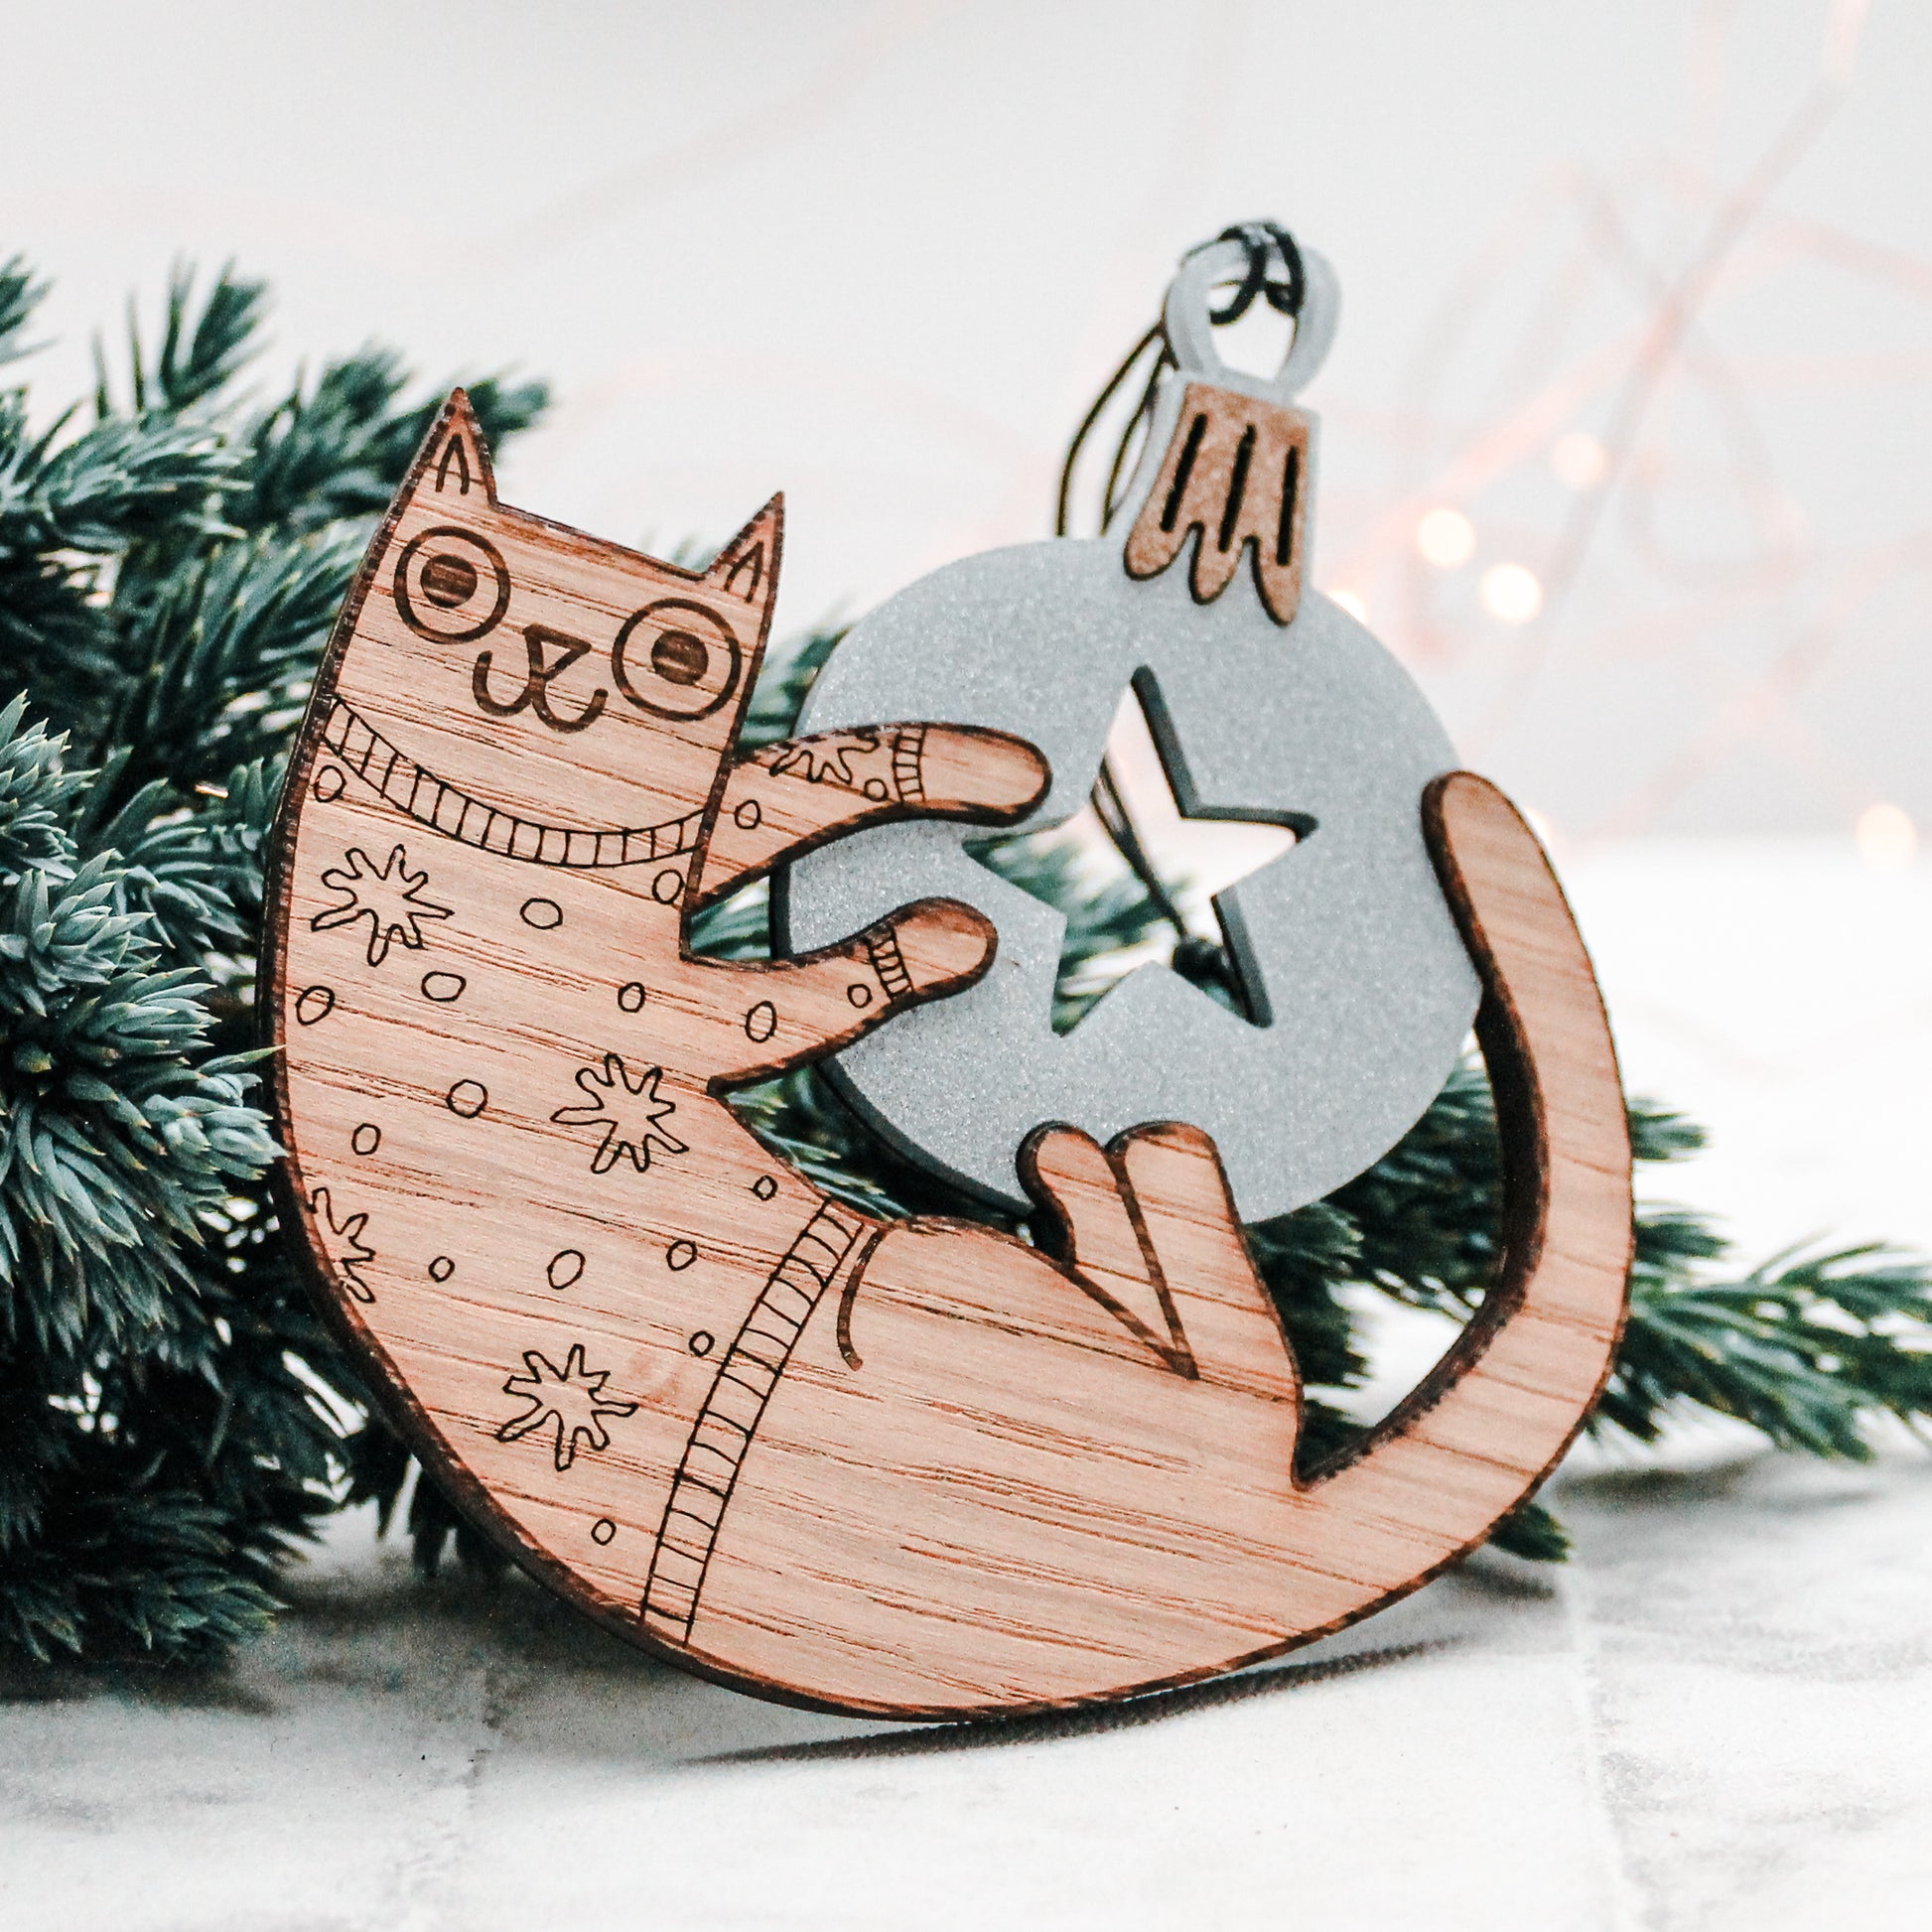 wooden christmas cat in a festive star jumper playing with a silver Christmas bauble decoration.